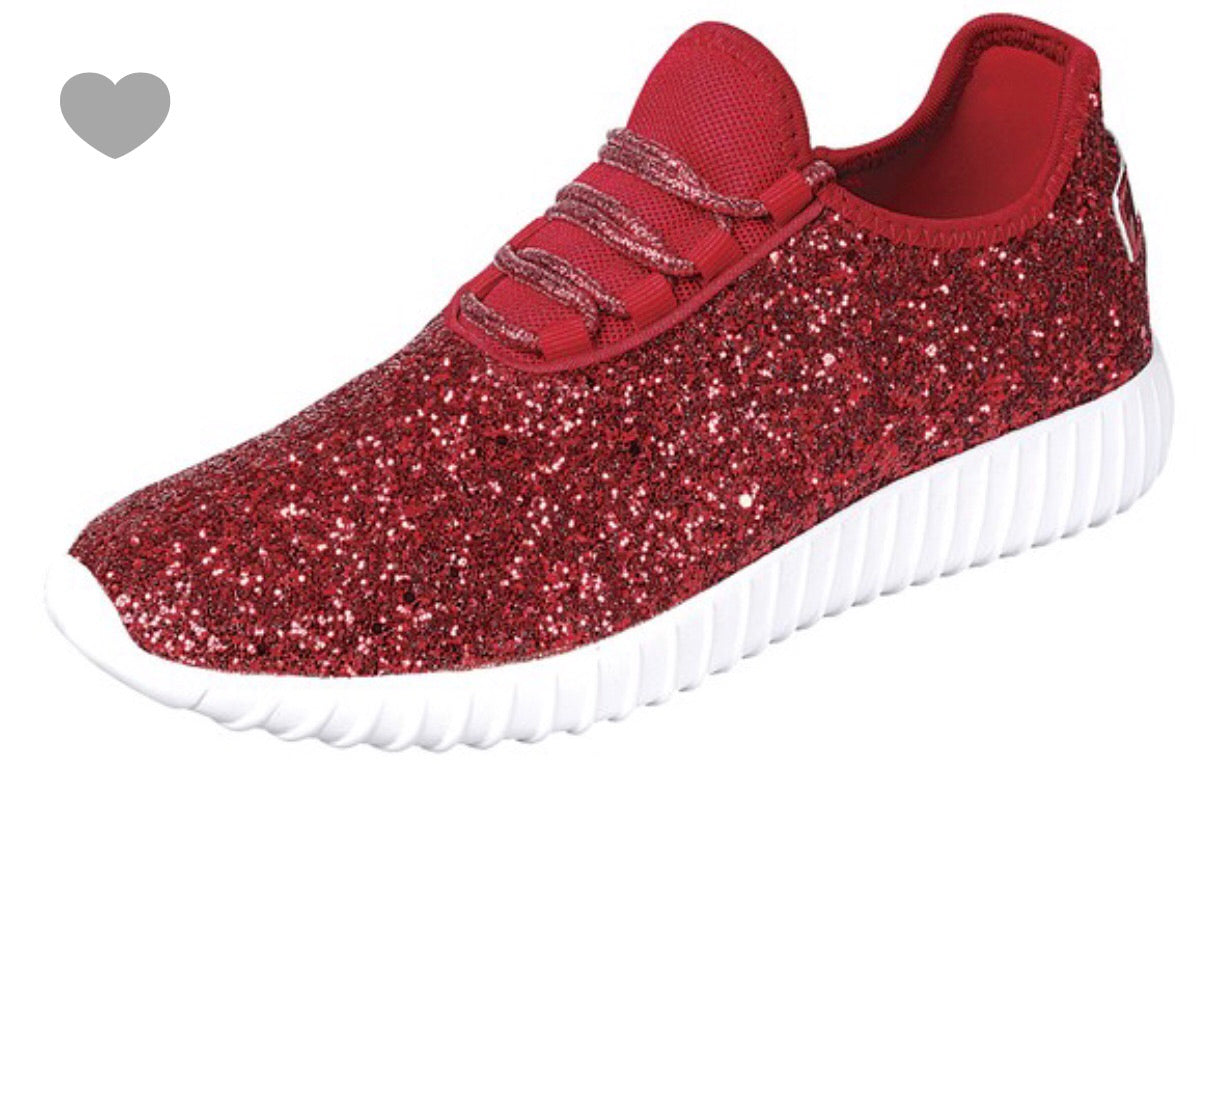 red sparkly shoes